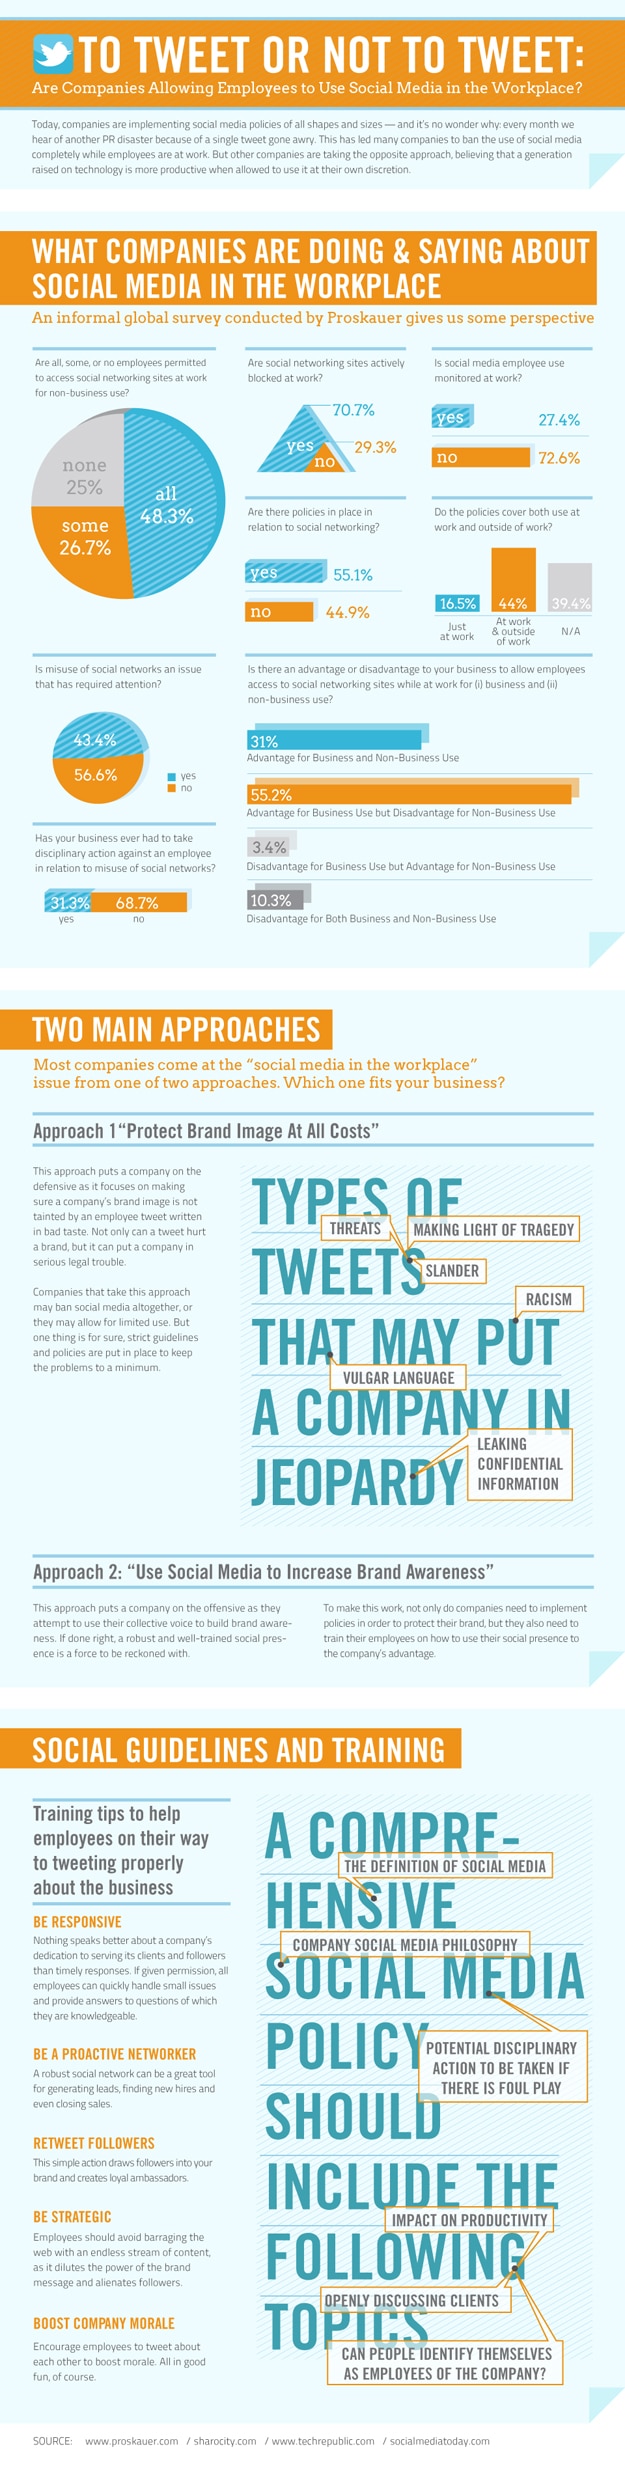 Employees Tweeting At Work: Two Different Opinions [Infographic]